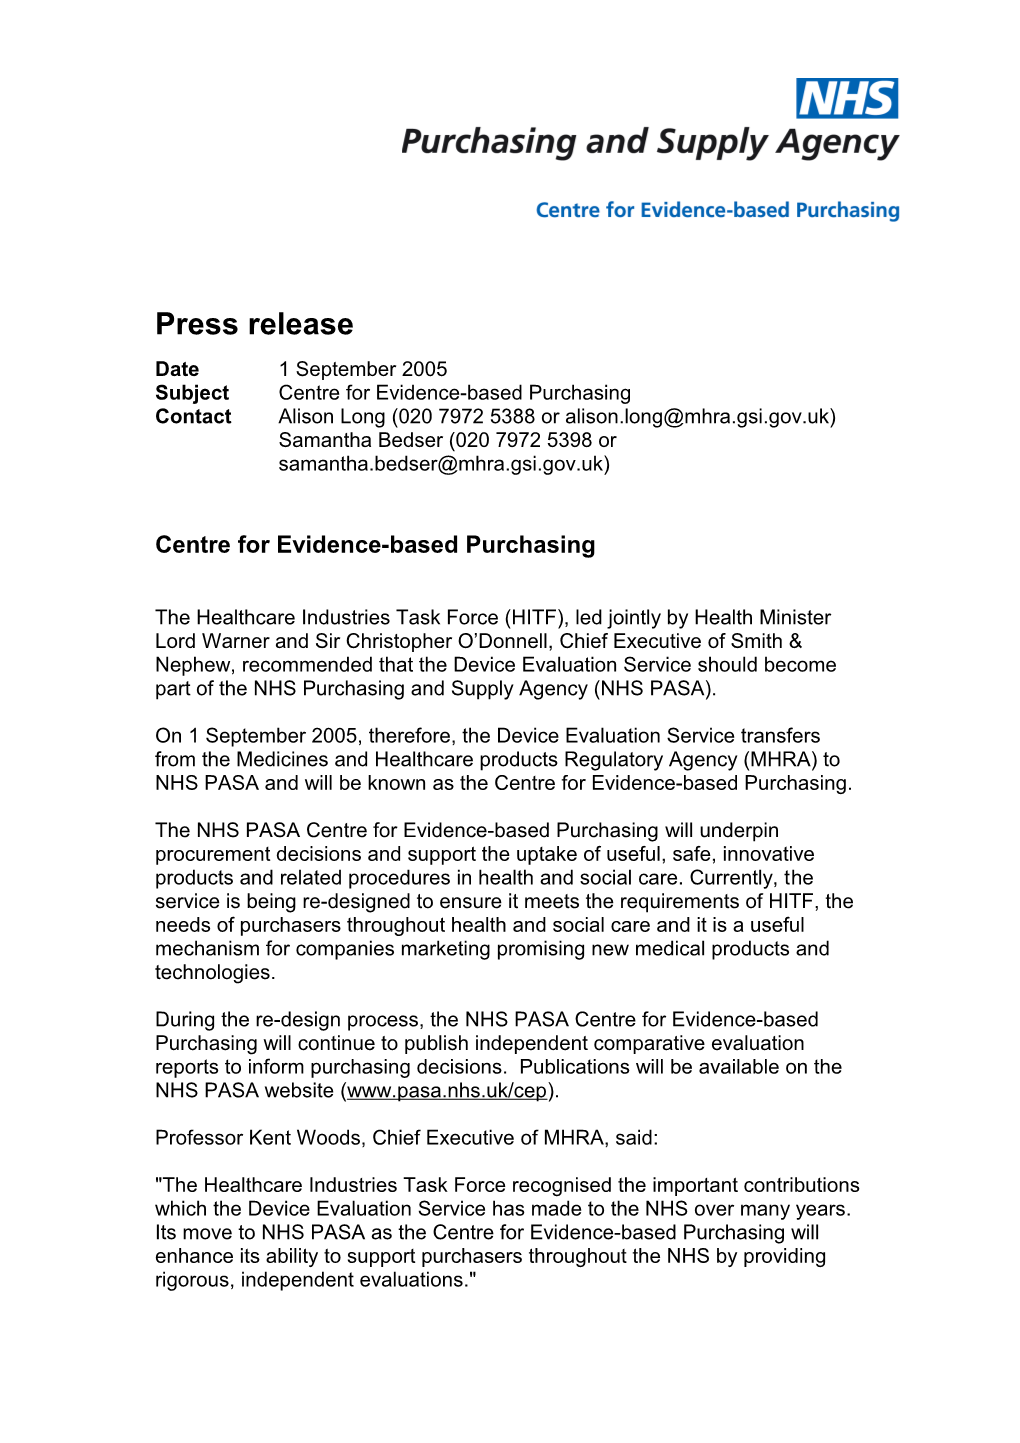 Subject Centre for Evidence-Based Purchasing